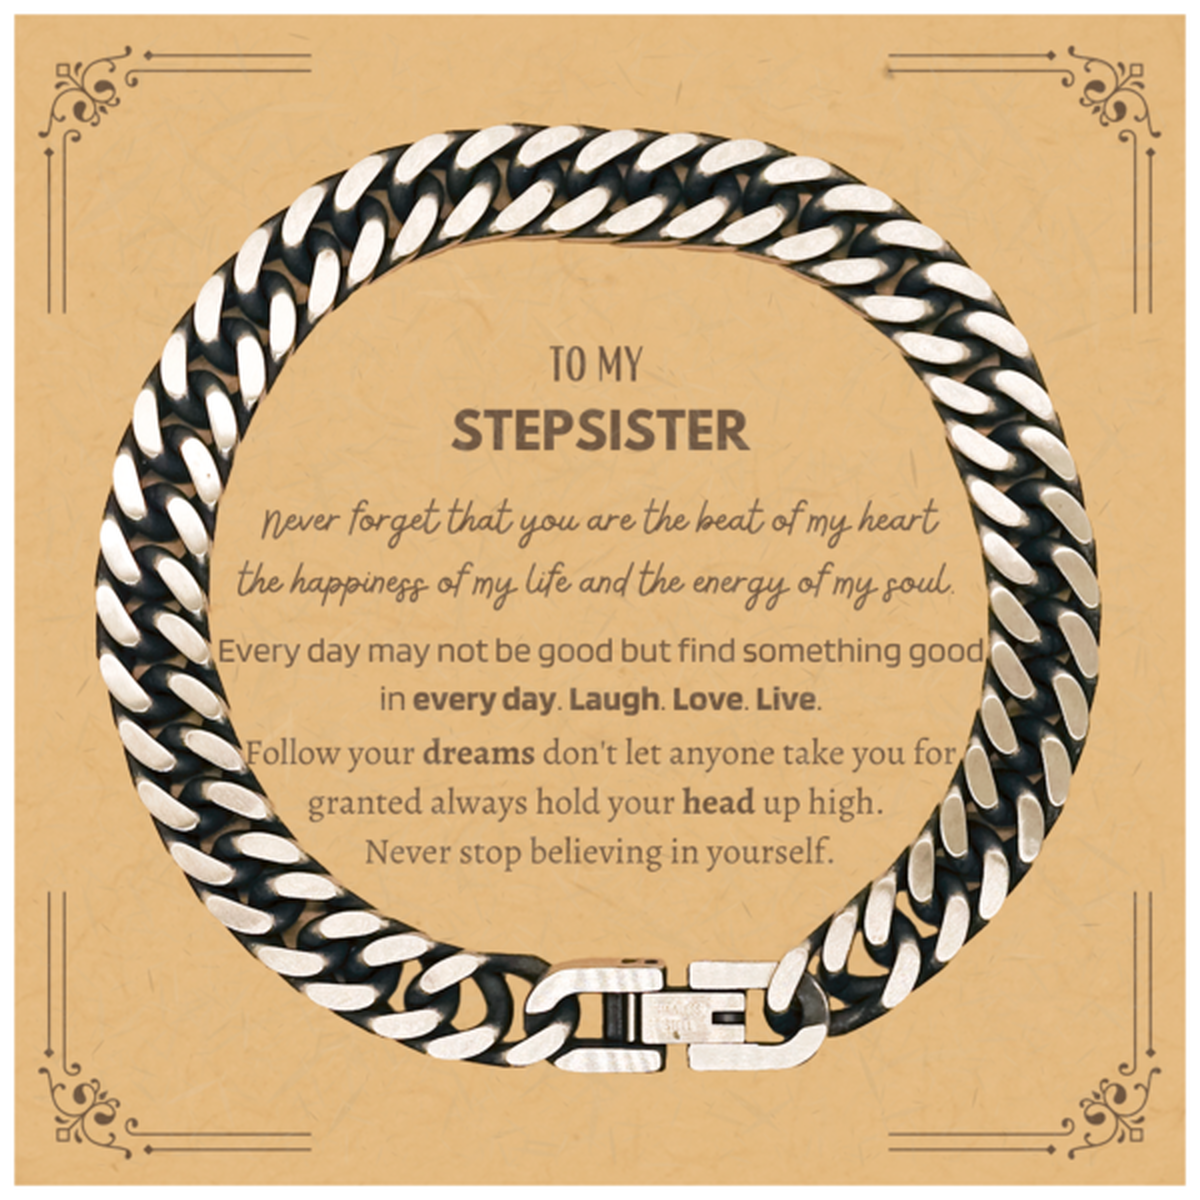 To My Stepsister Message Card Gifts, Christmas Stepsister Cuban Link Chain Bracelet Present, Birthday Unique Motivational For Stepsister, To My Stepsister Never forget that you are the beat of my heart the happiness of my life and the energy of my soul